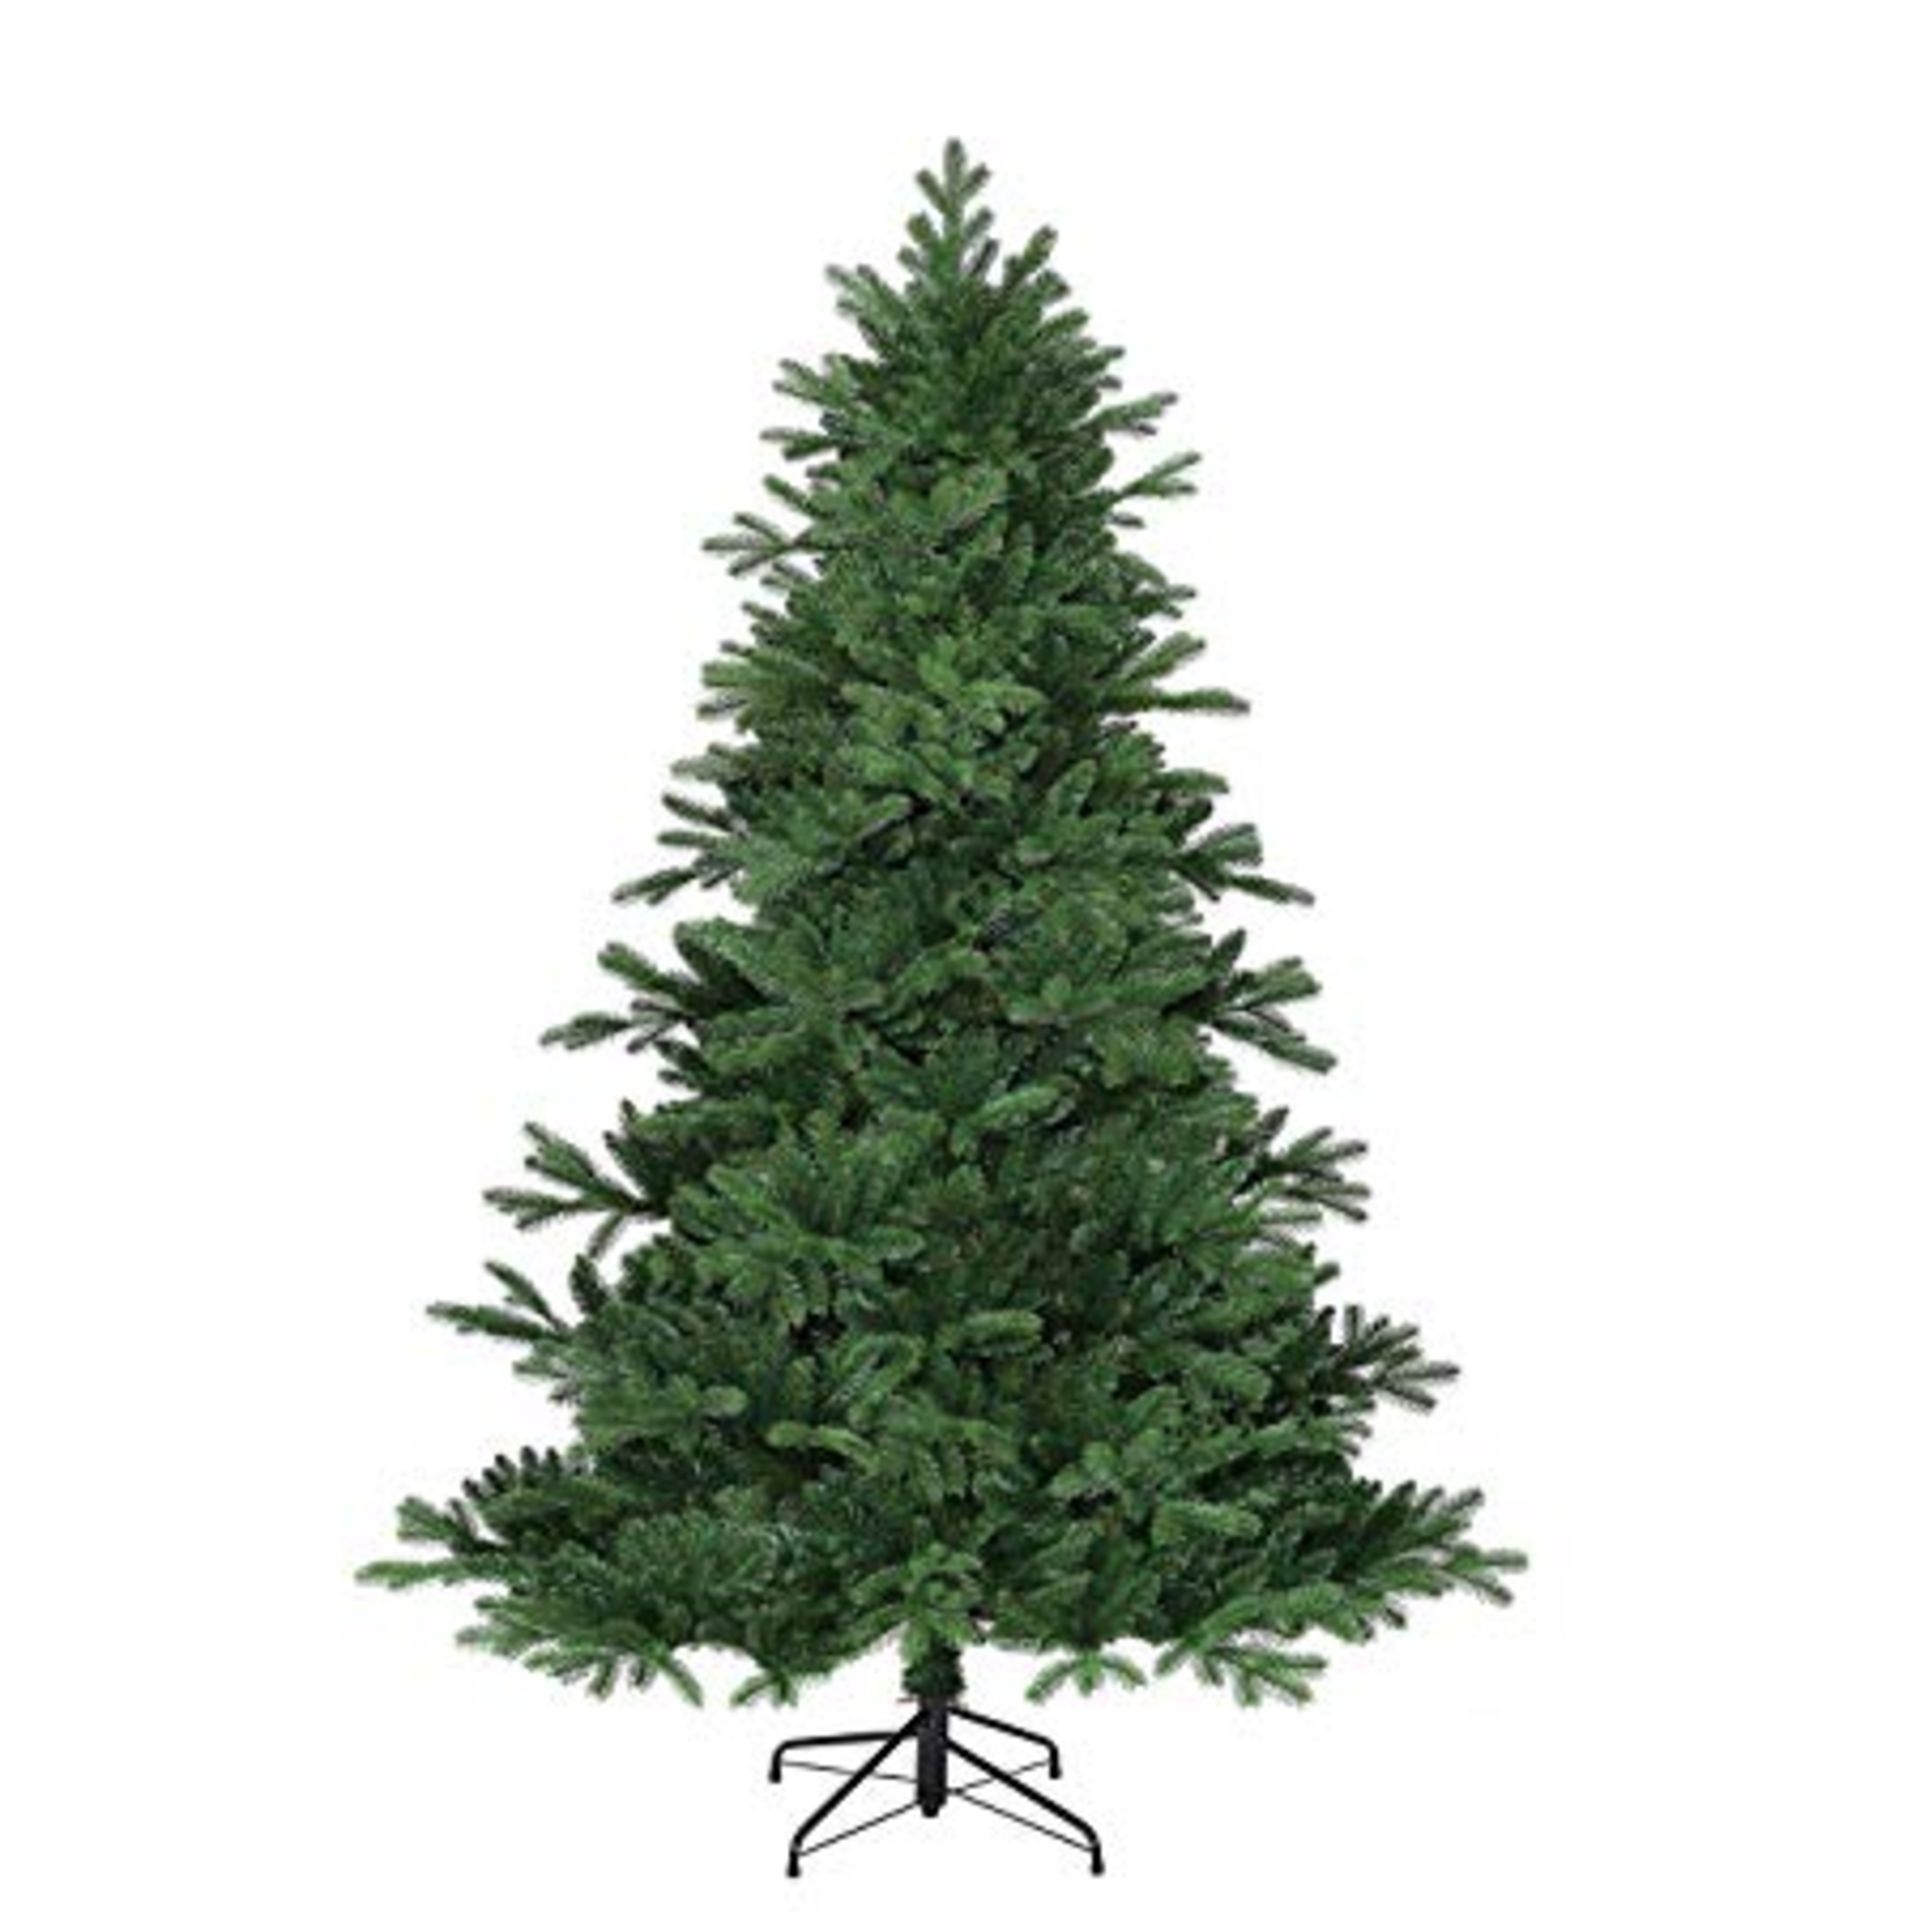 V Brand New 180CM Life Like Mixed Christmas Tree With Medal Stand